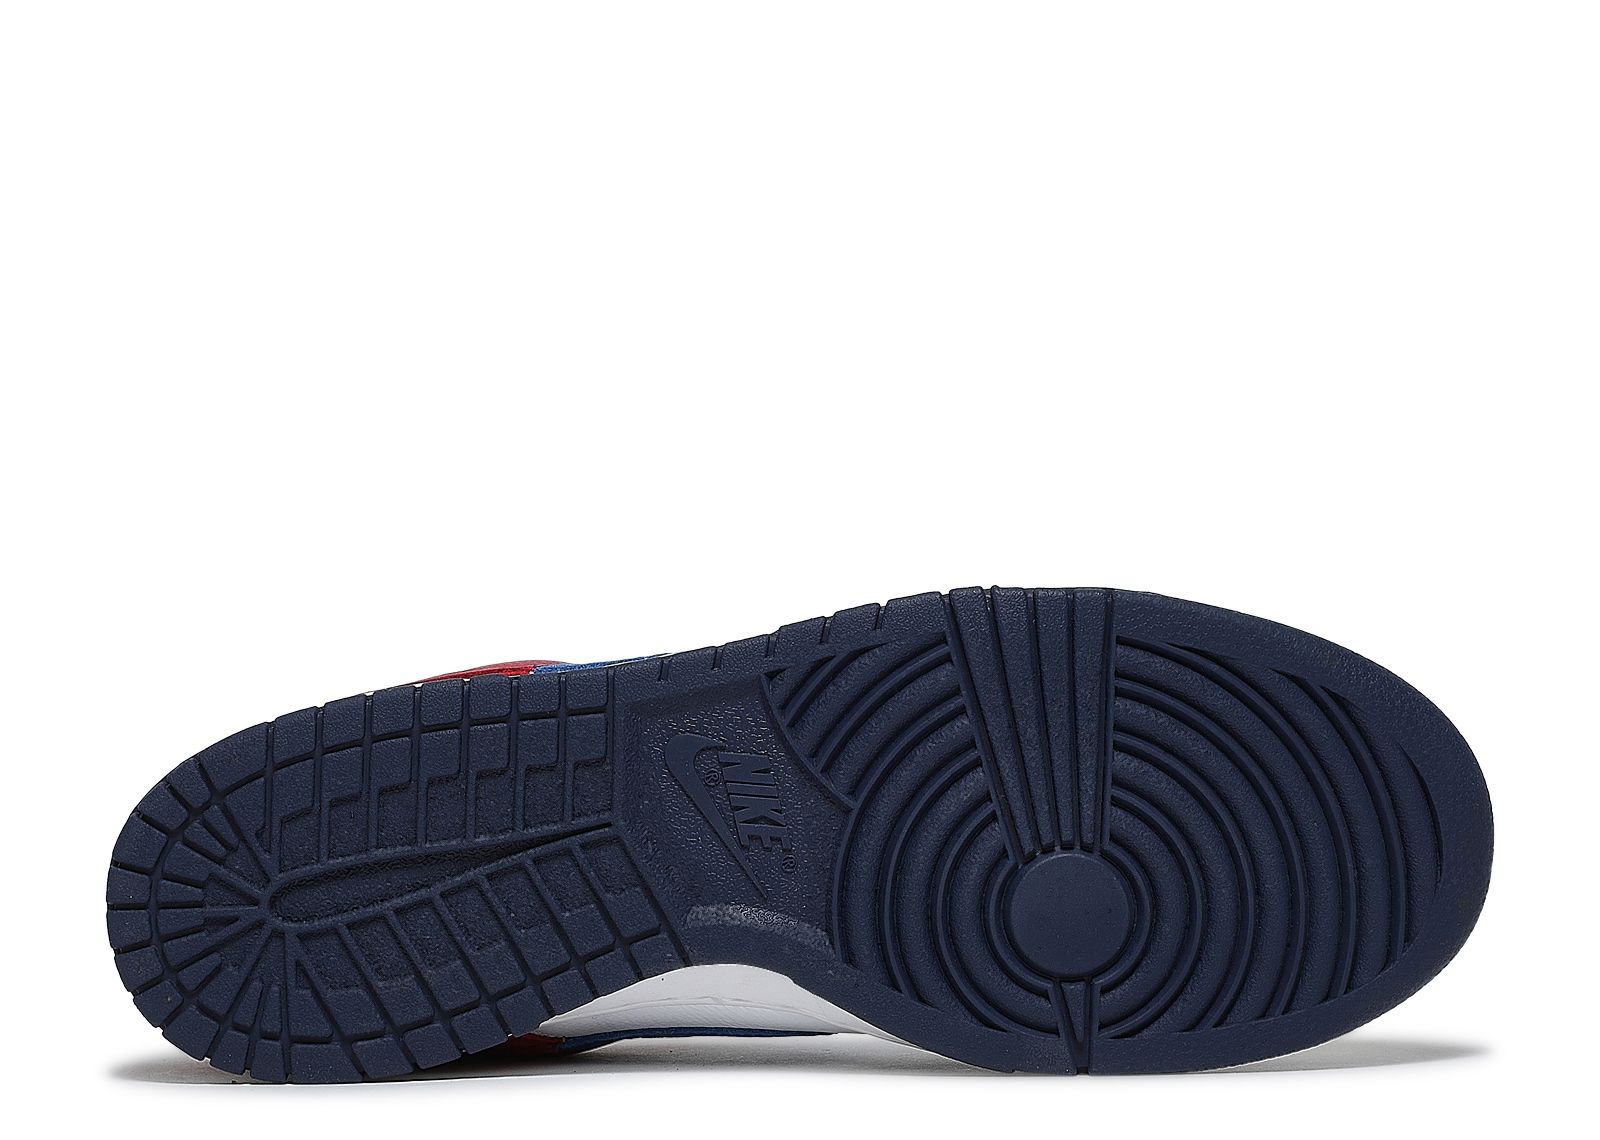 Dunk Low Japan QS 'What The' - Nike - AA4414 400 - midnight navy 